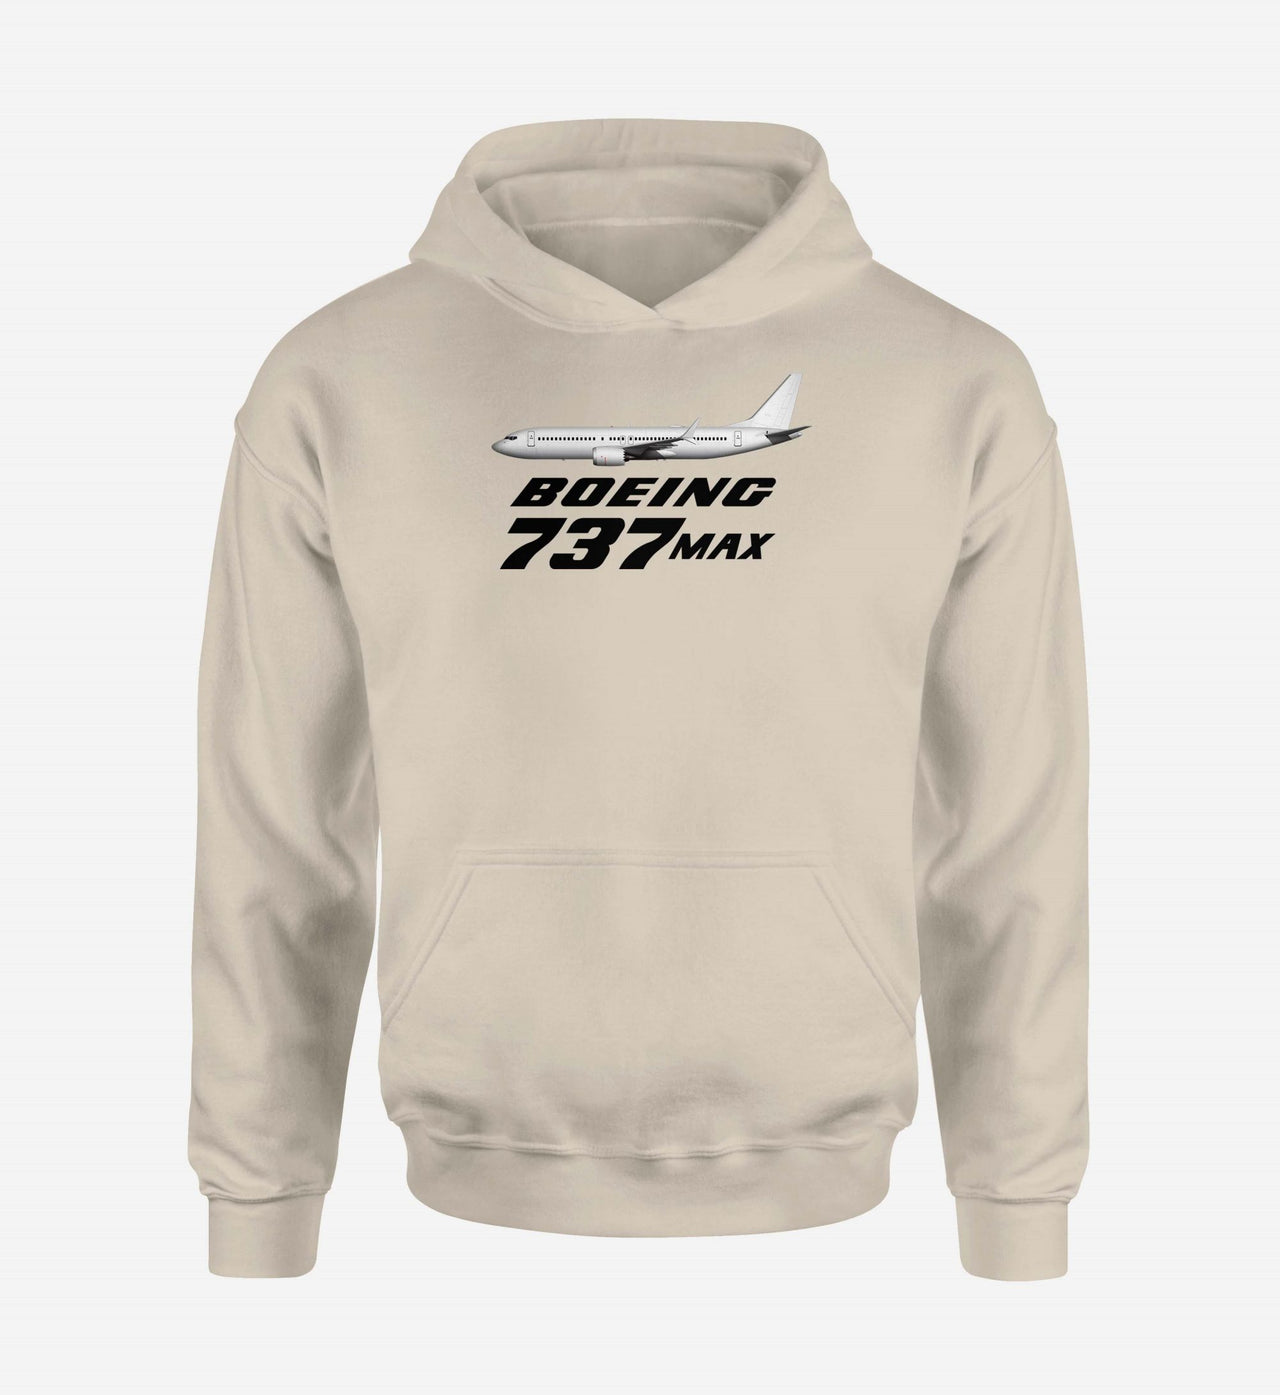 The Boeing 737Max Designed Hoodies